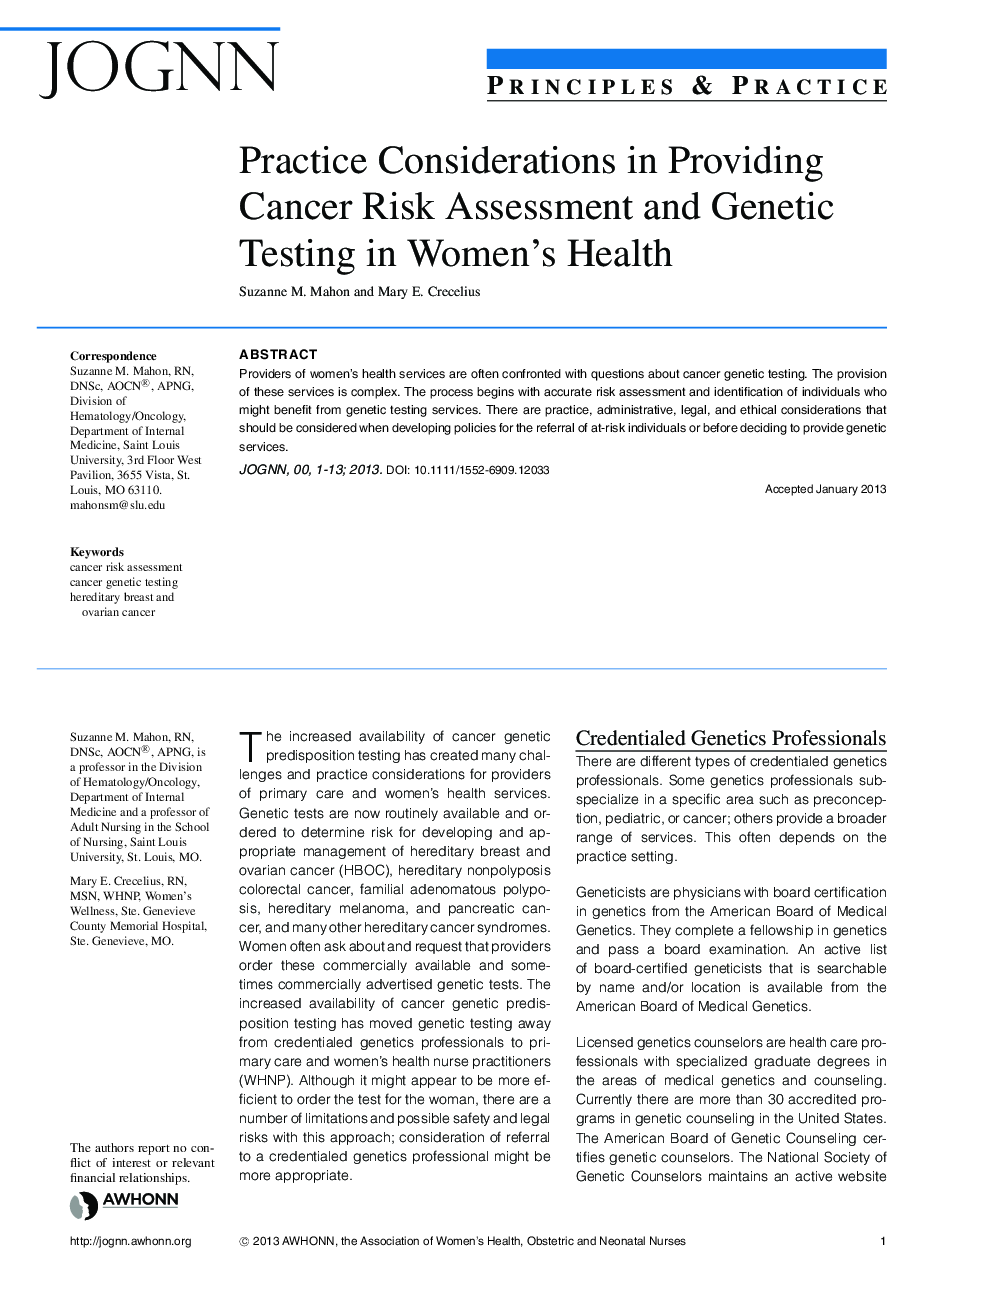 Practice Considerations in Providing Cancer Risk Assessment and Genetic Testing in Women's Health